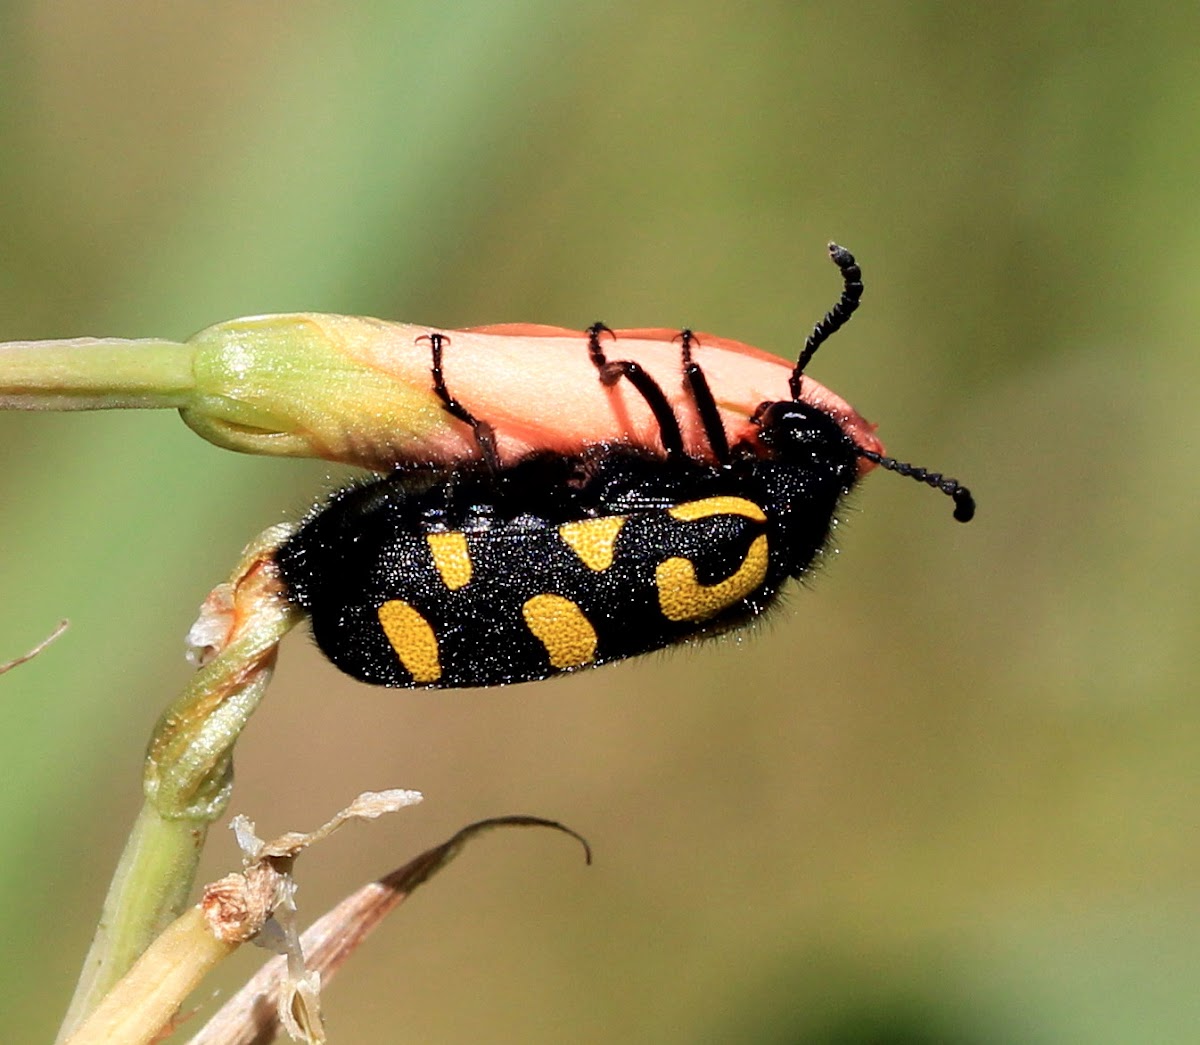 Spotted blister beetle